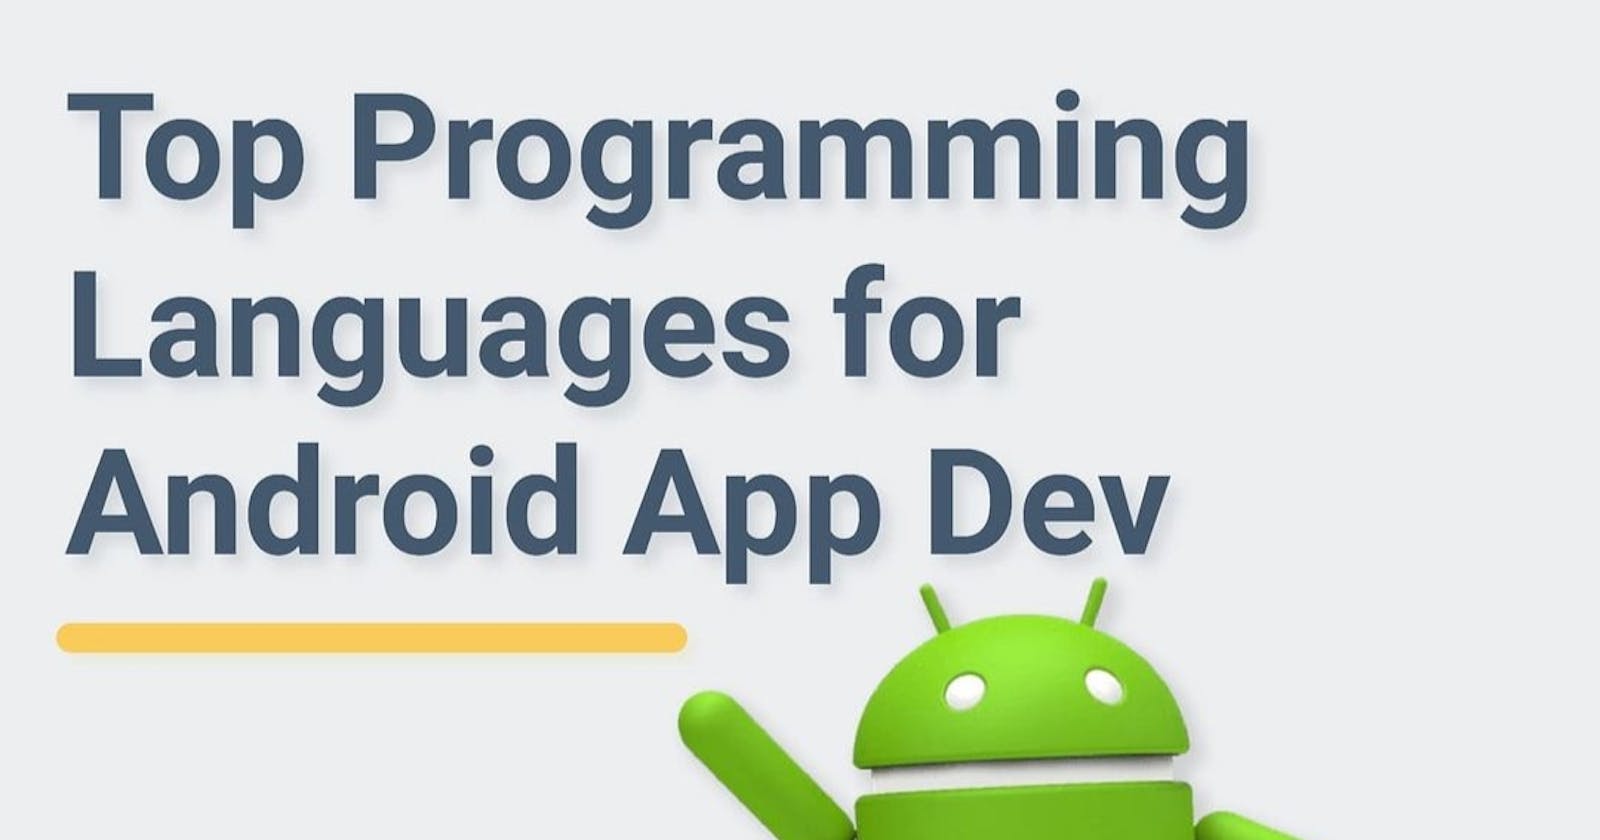 Top Programming Languages for Android App Dev